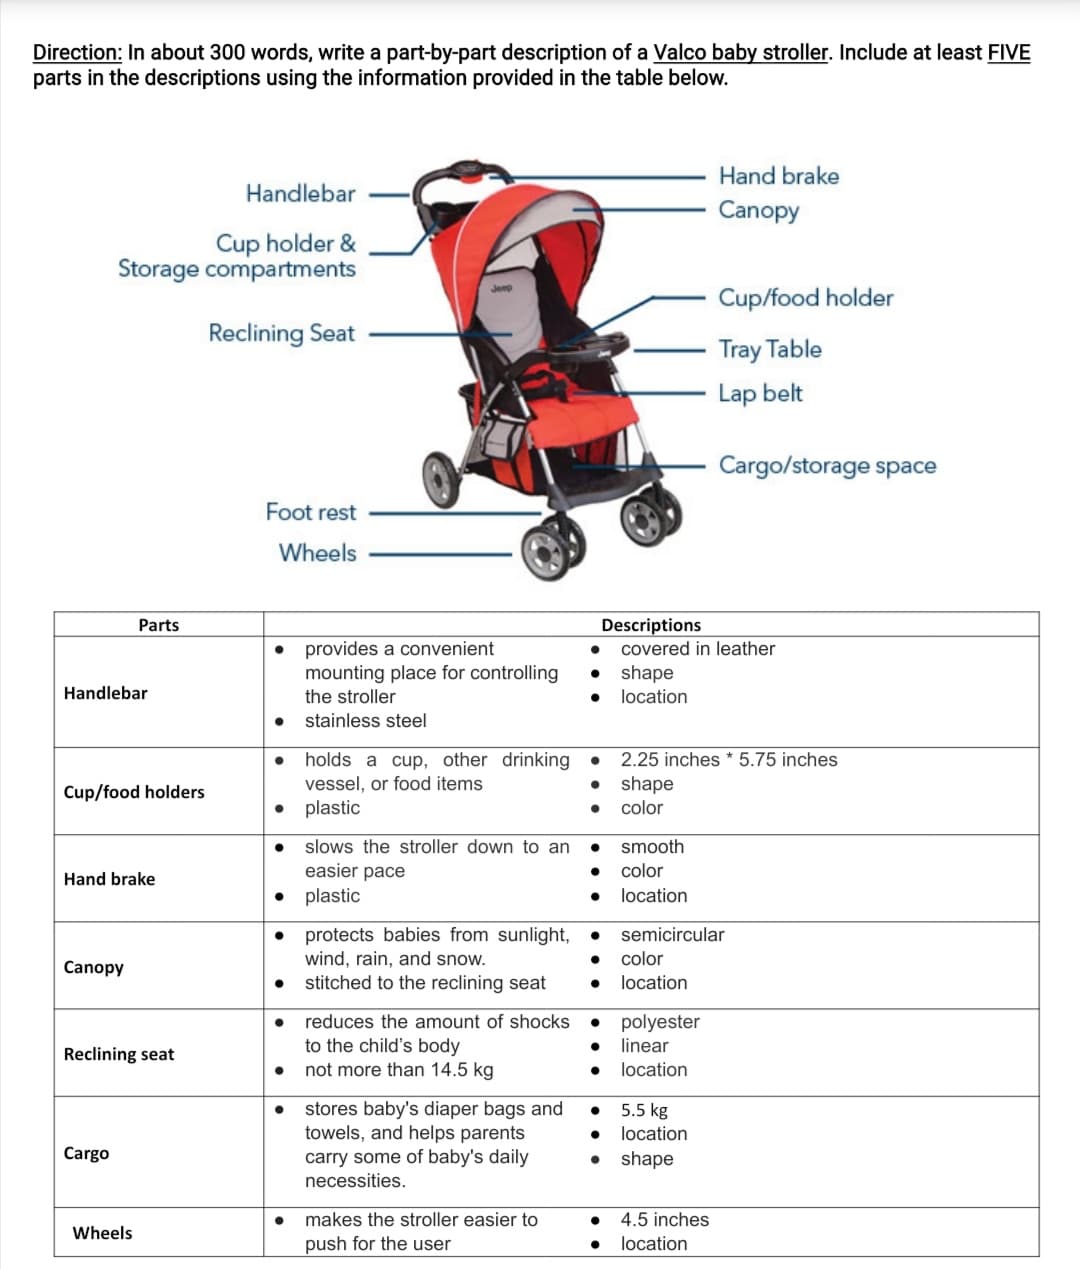 Direction: In about 300 words, write a part-by-part description of a Valco baby stroller. Include at least FIVE
parts in the descriptions using the information provided in the table below.
Hand brake
Handlebar
Canopy
Cup holder &
Storage compartments
Jeep
Cup/food holder
Reclining Seat
Tray Table
Lap belt
Cargo/storage space
Foot rest
Wheels
Parts
Descriptions
• provides a convenient
mounting place for controlling
covered in leather
shape
location
Handlebar
the stroller
• stainless steel
holds a cup, other drinking
vessel, or food items
• plastic
2.25 inches * 5.75 inches
Cup/food holders
shape
color
slows the stroller down to an
smooth
easier pace
color
Hand brake
plastic
location
semicircular
protects babies from sunlight,
wind, rain, and snow.
stitched to the reclining seat
color
Canopy
location
• reduces the amount of shocks
to the child's body
not more than 14.5 kg
polyester
linear
Reclining seat
location
stores baby's diaper bags and
towels, and helps parents
carry some of baby's daily
necessities.
5.5 kg
location
Cargo
shape
makes the stroller easier to
4.5 inches
Wheels
push for the user
location
